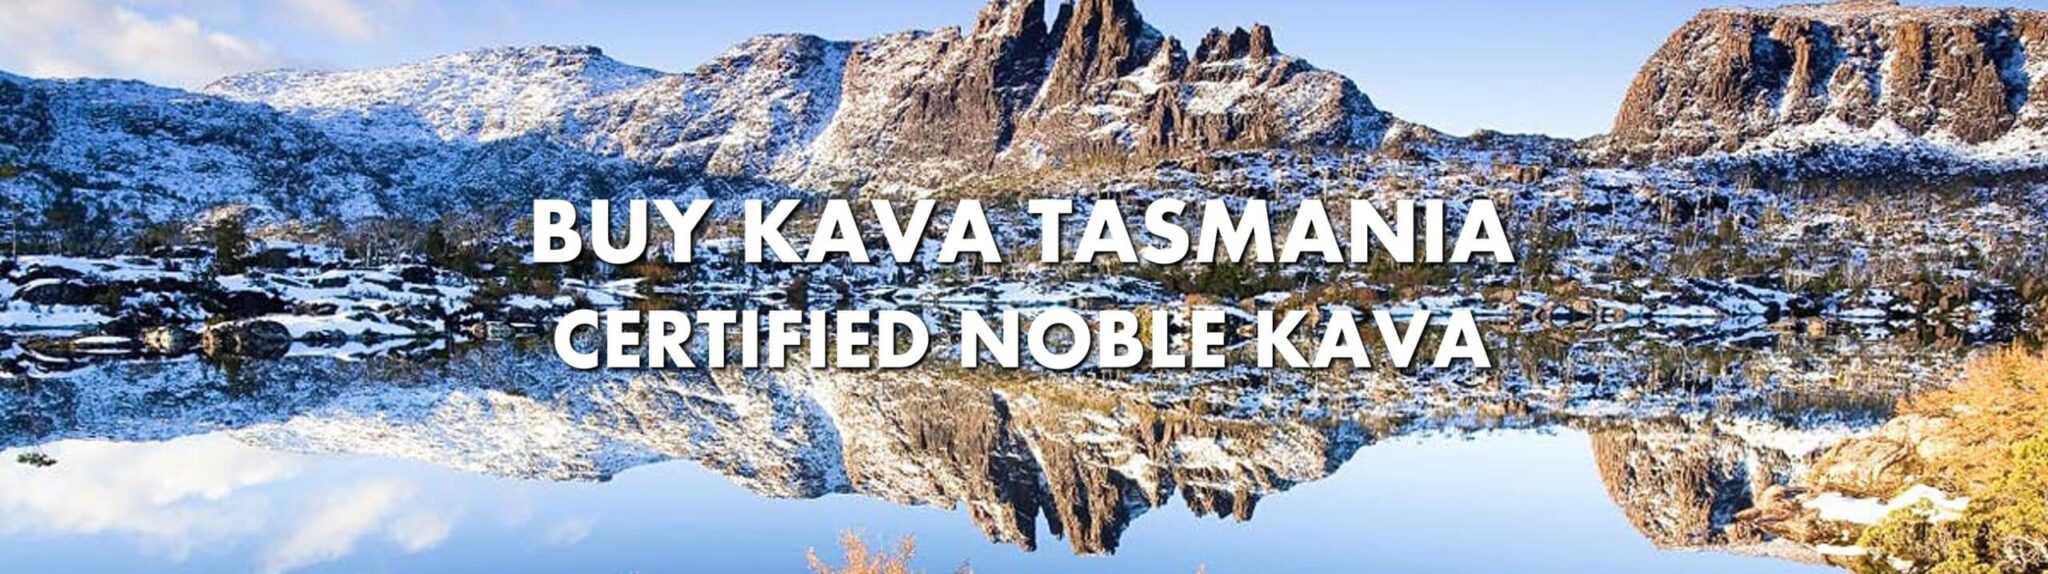 Snow-covered mountains in Tasmania with caption Buy Kava Tasmania Certified Noble Kava